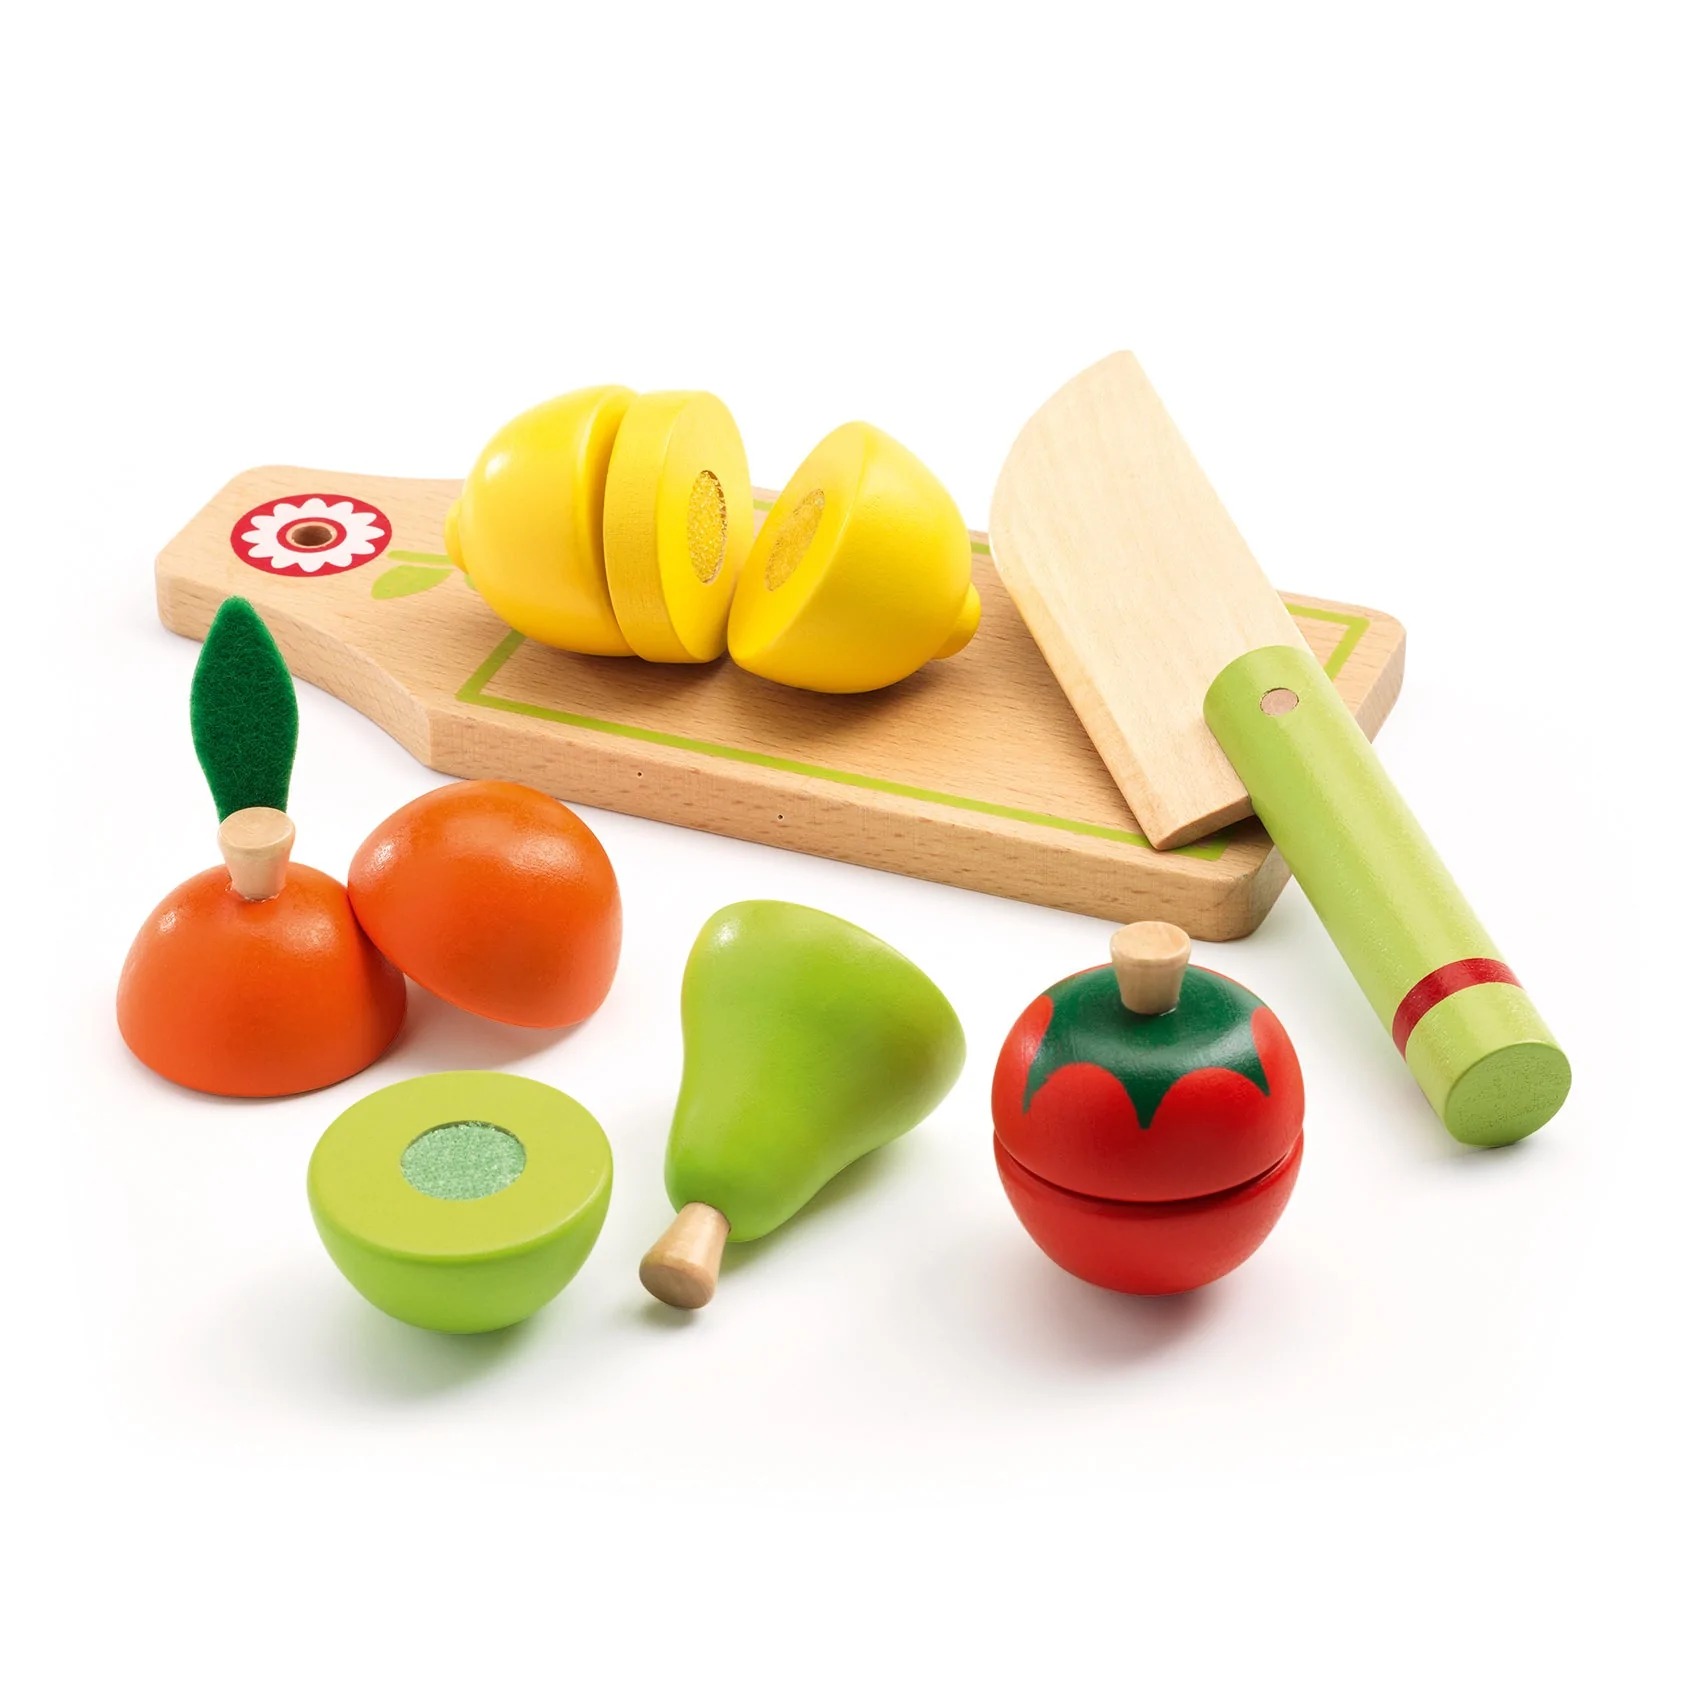 Djeco Cutting Fruit and Vegetables Role Play Set